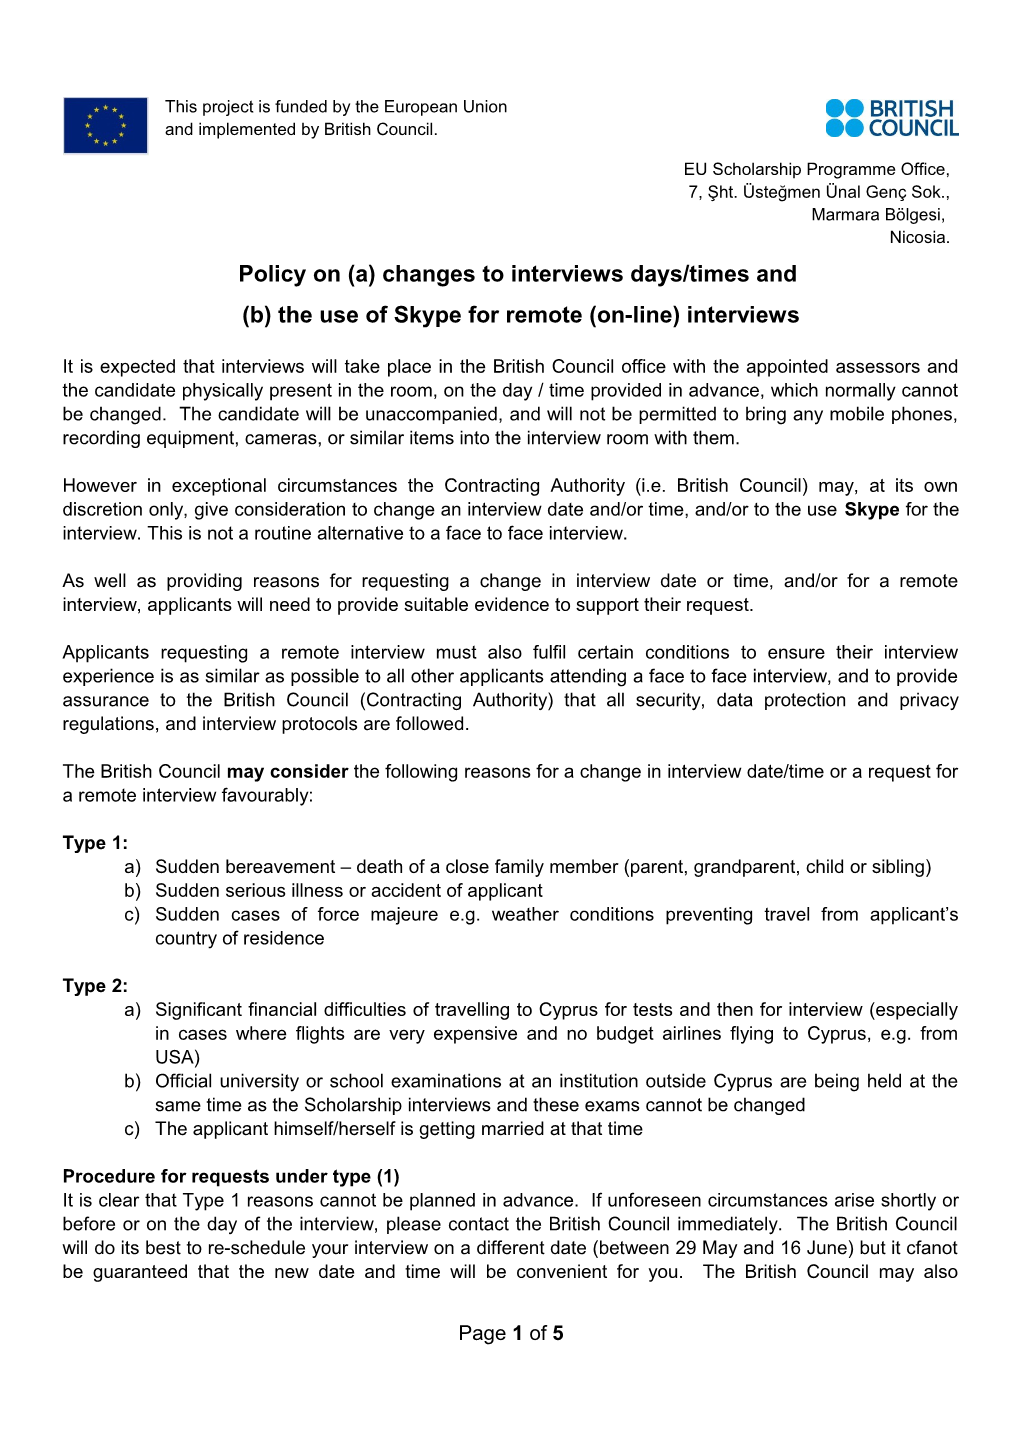 Policy on (A) Changes to Interviews Days/Times And